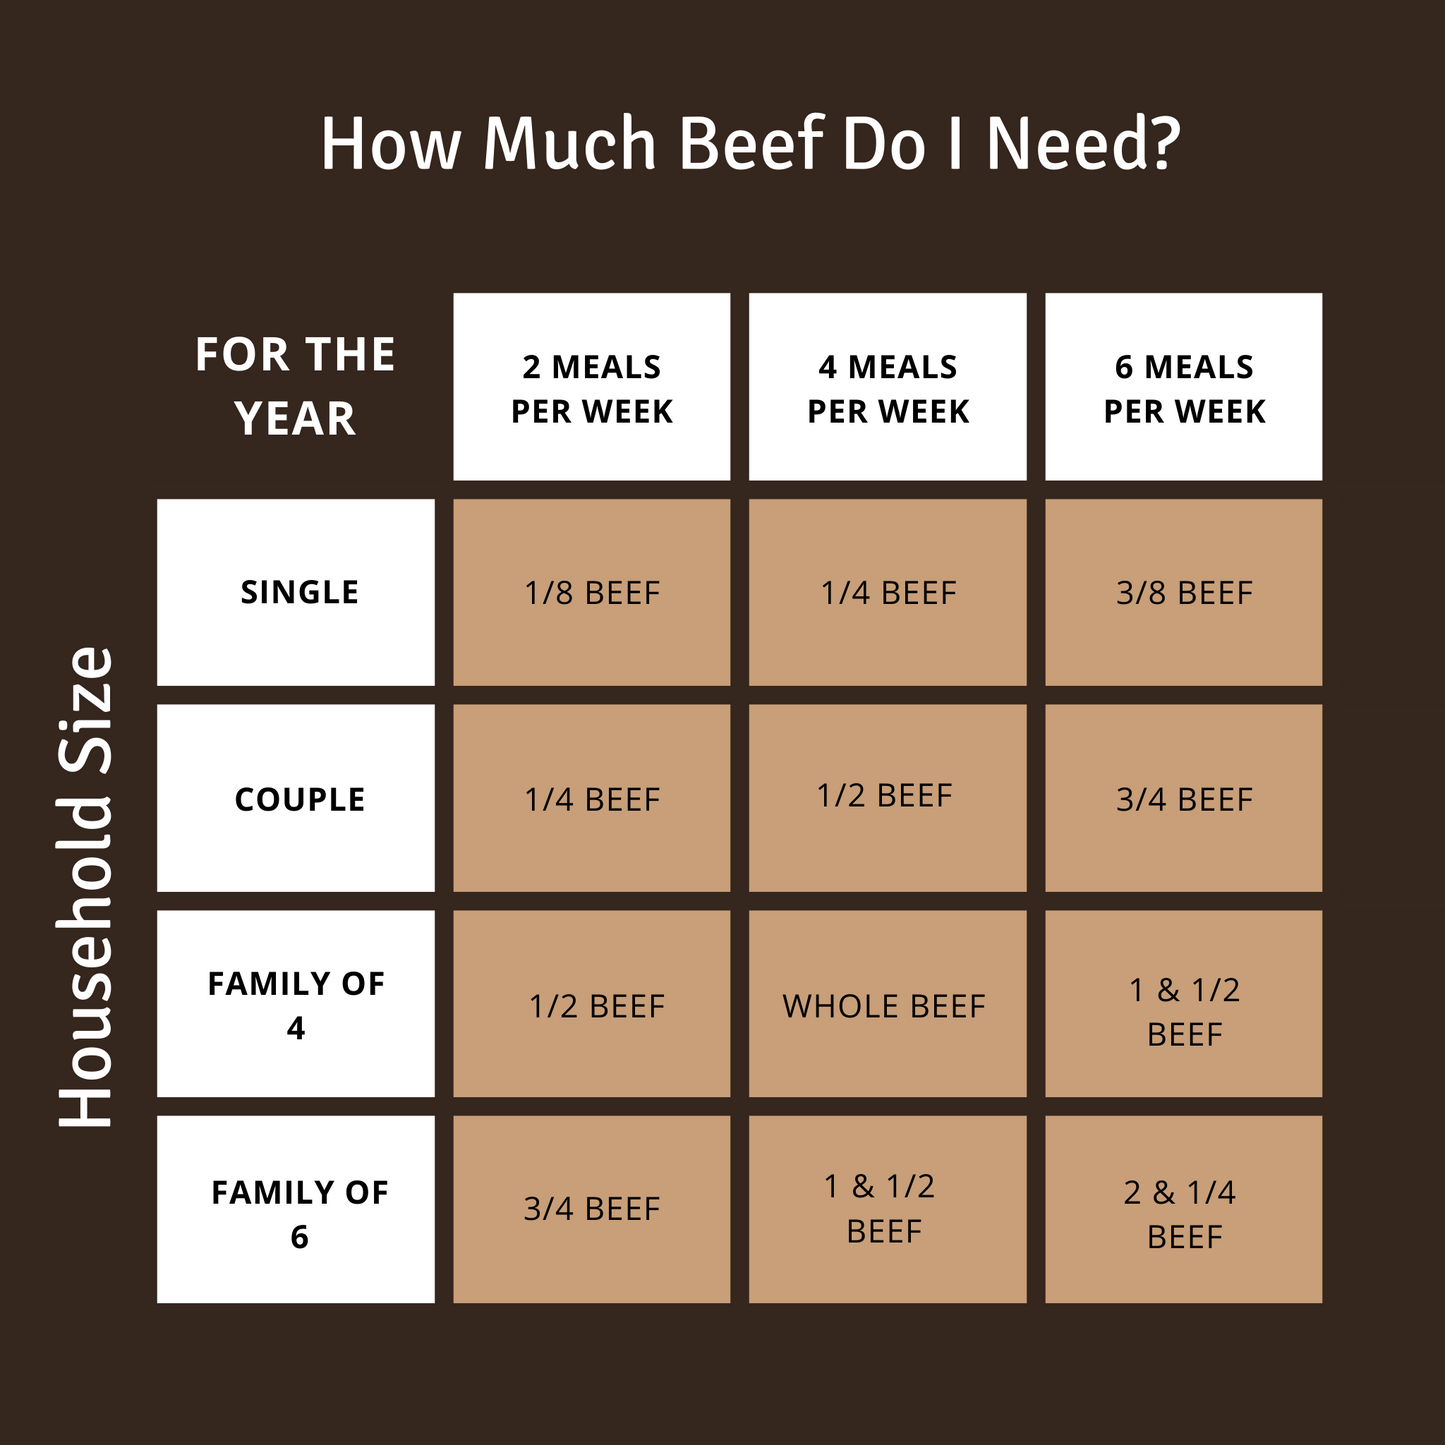 1/4 Grass-Fed Beef Package - 70-90lbs